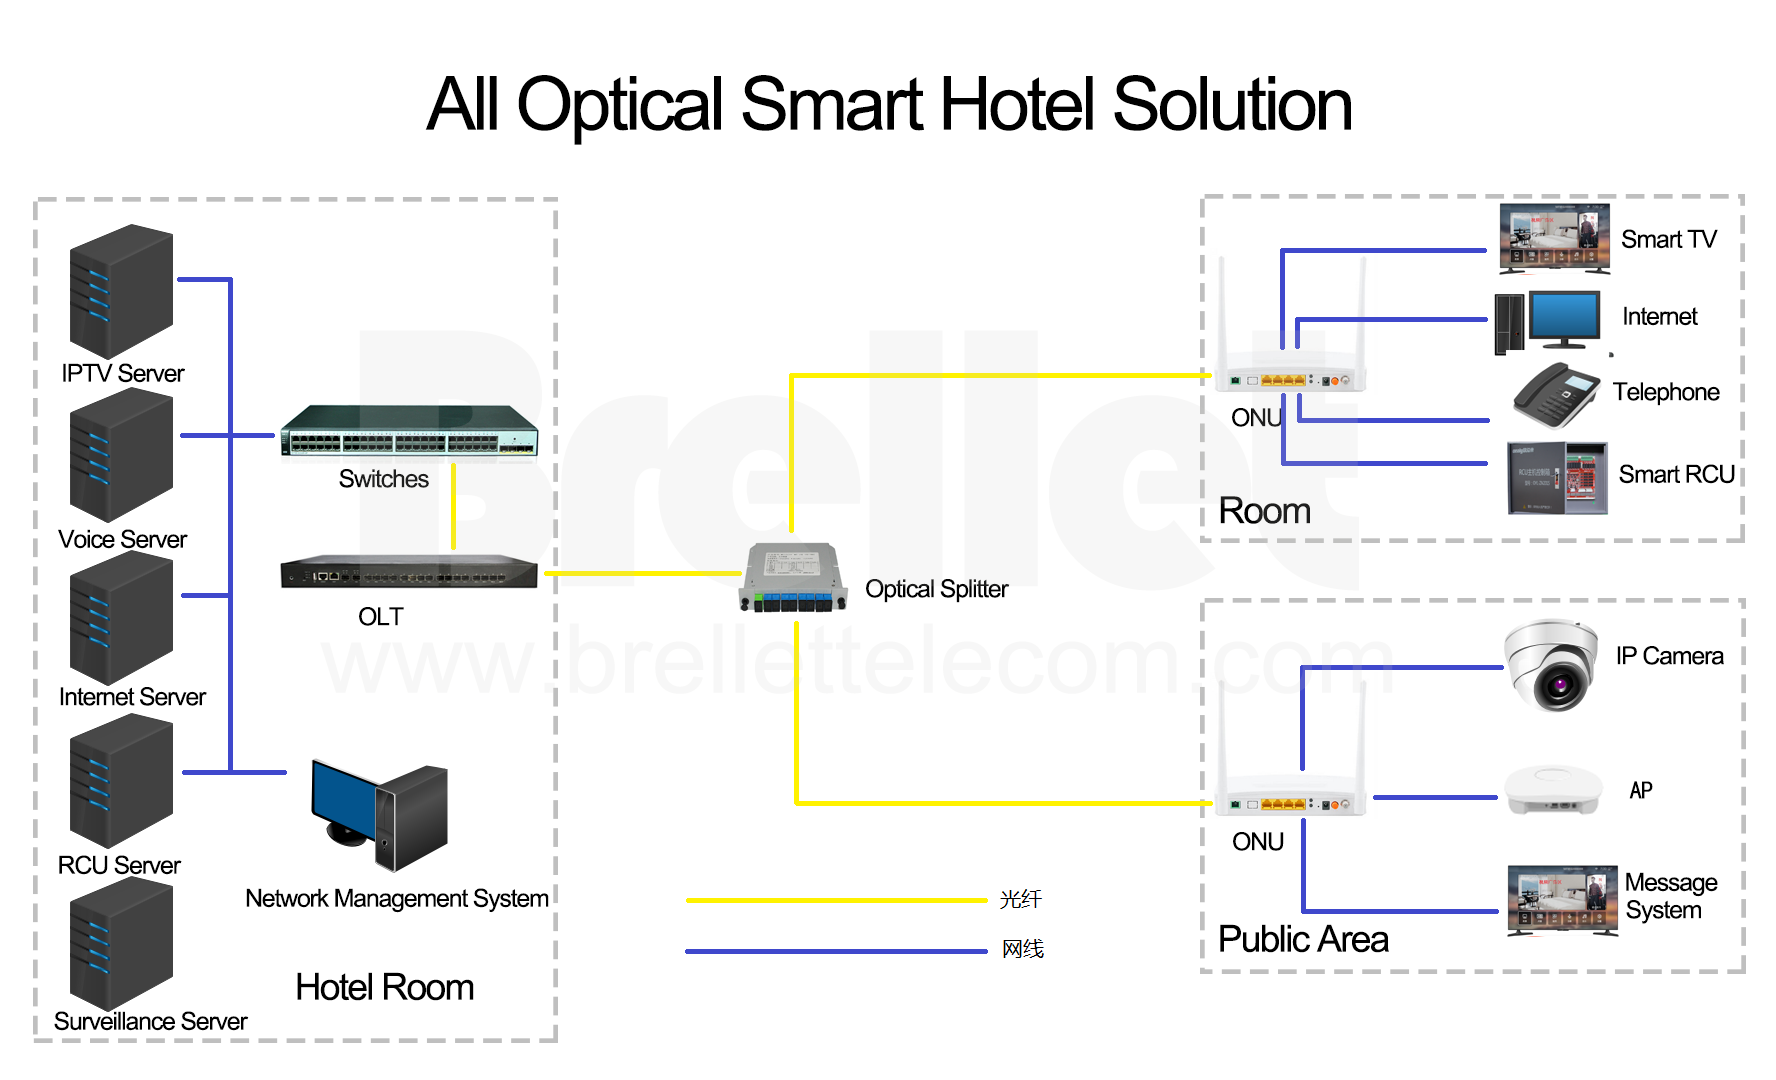 All Optical Smart Hotel Solution